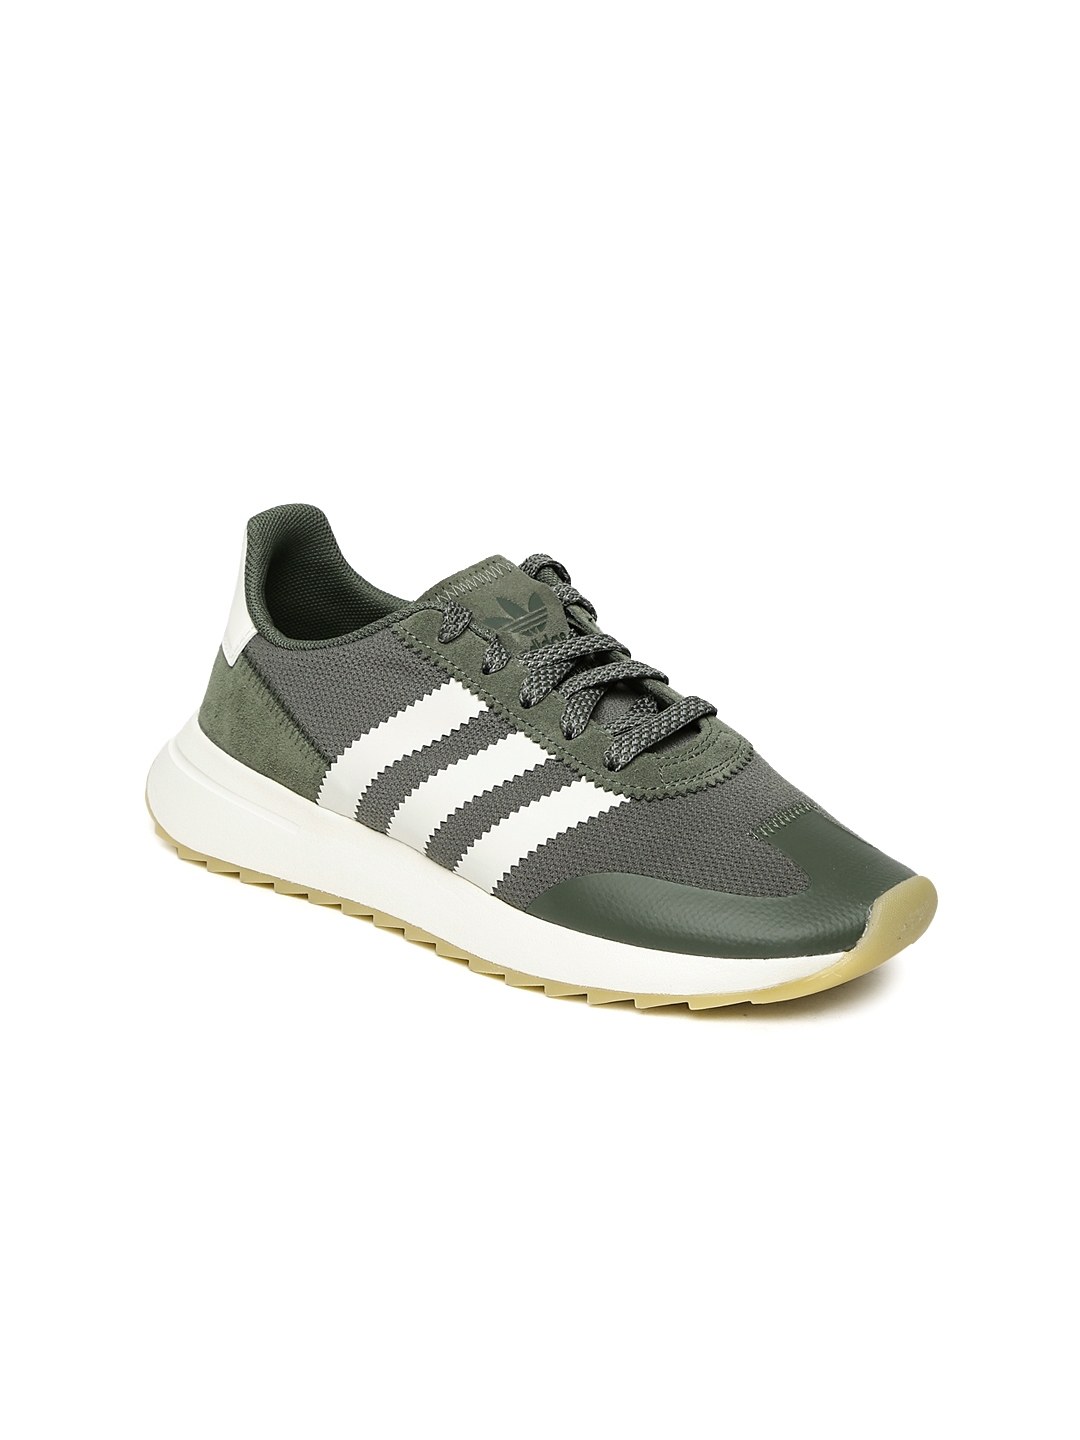 adidas womens shoes olive green